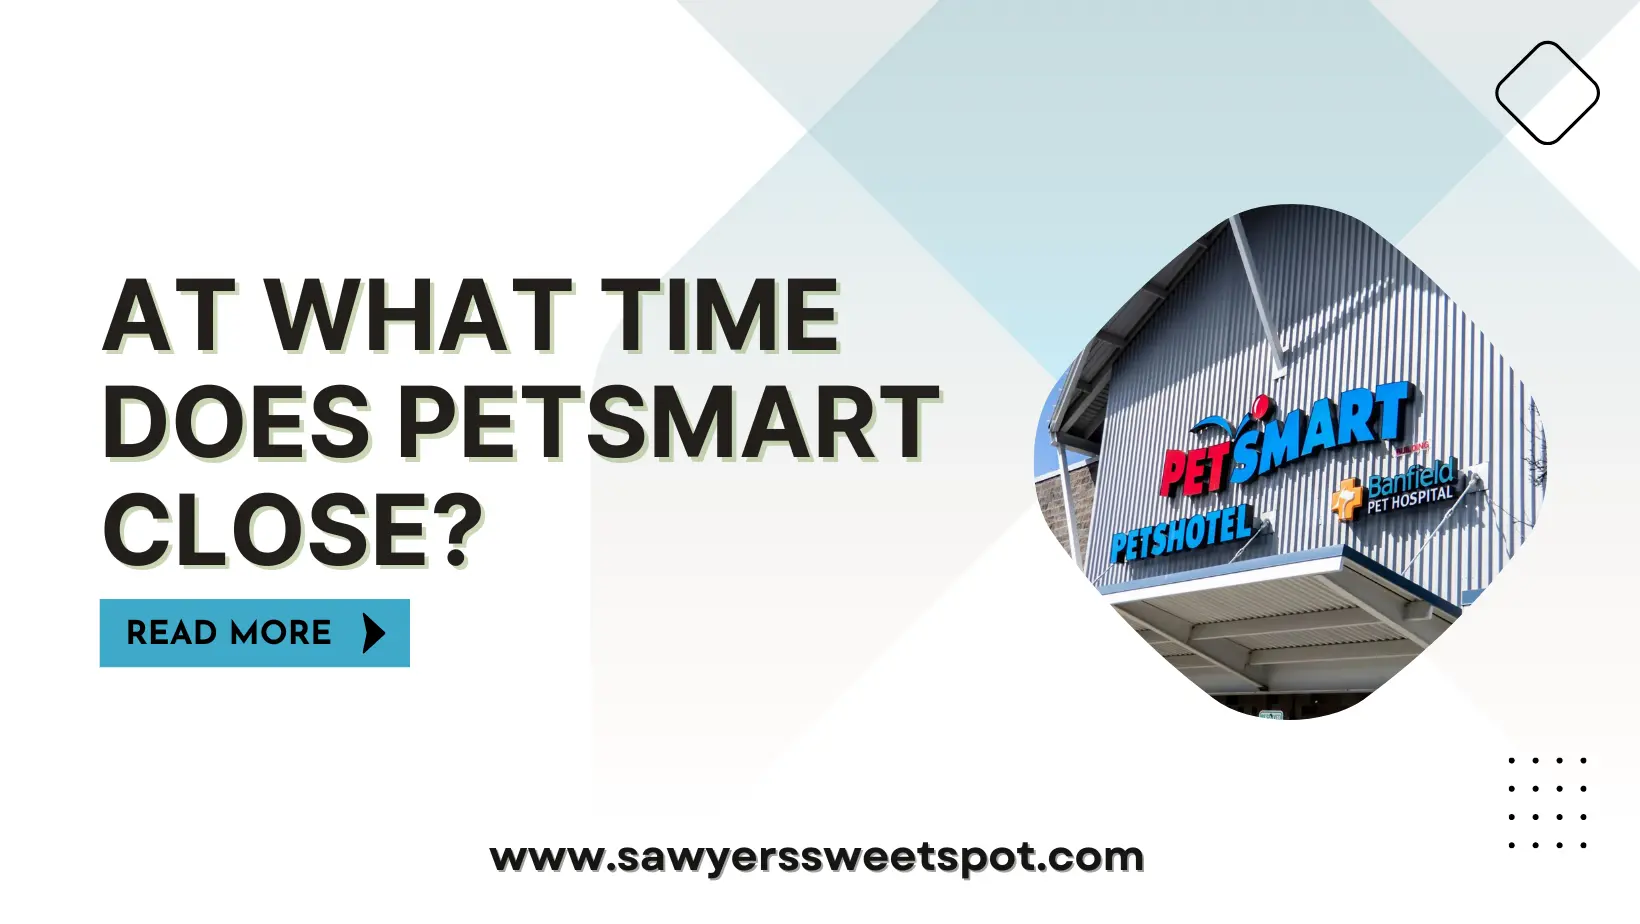 At What Time Does Petsmart Close?